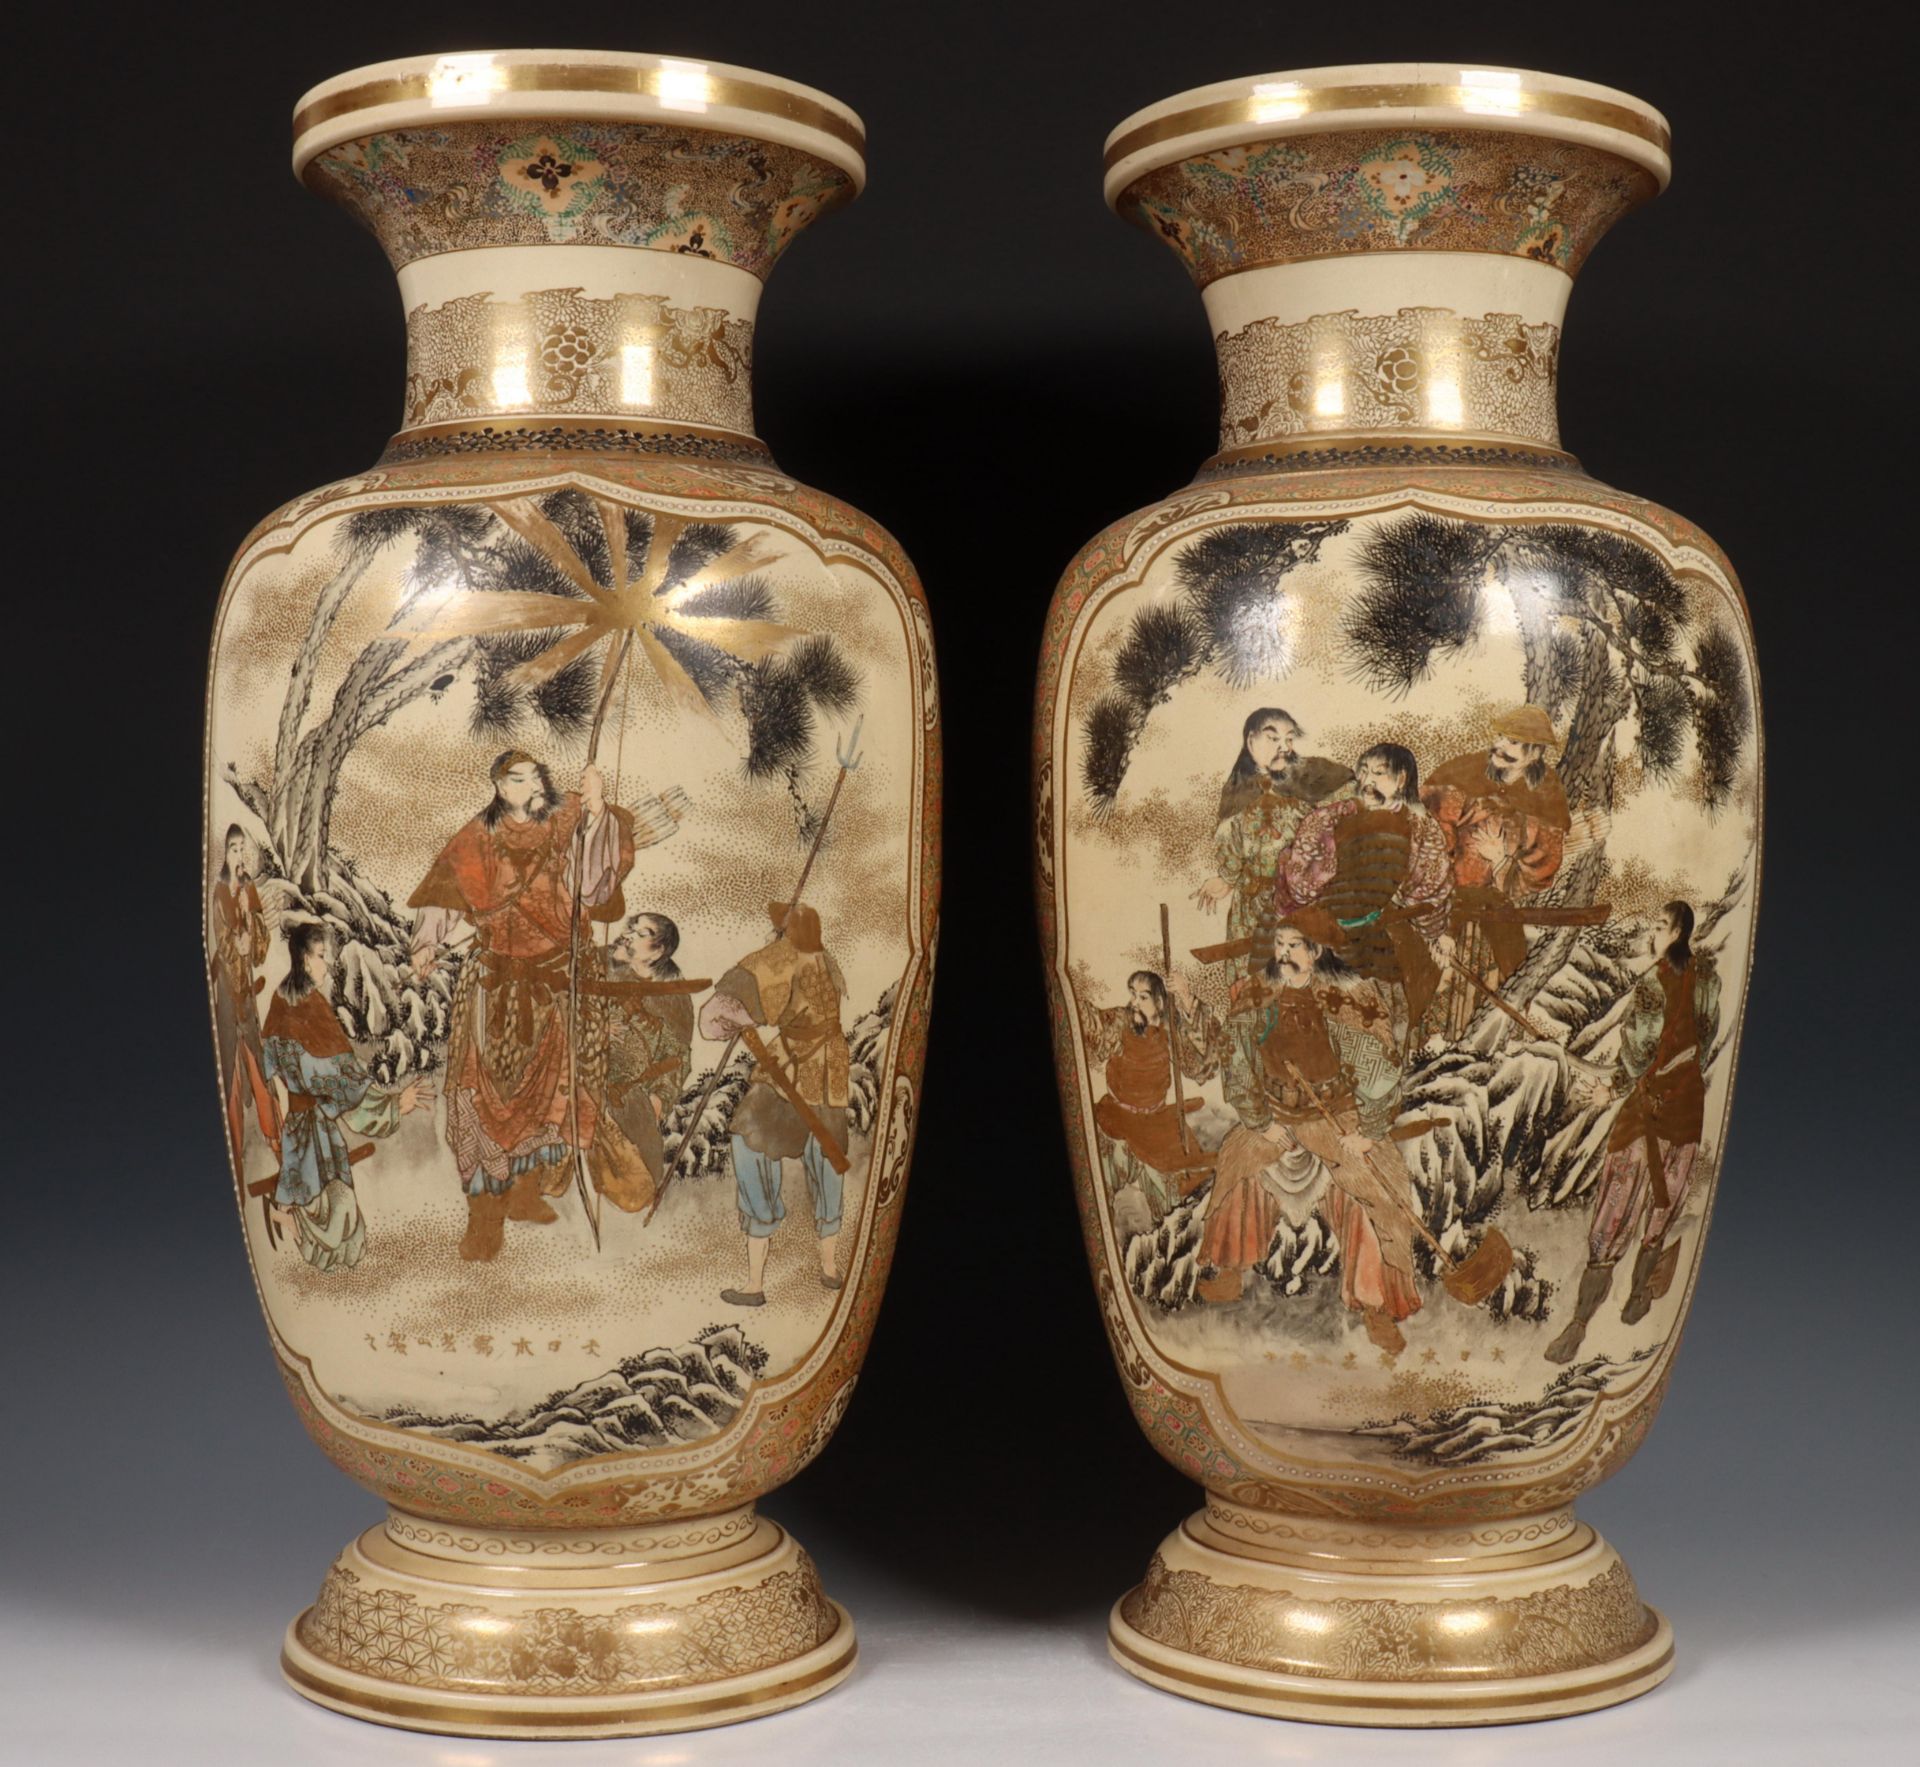 Japan, two Satsuma baluster vases, late 19th century, variously decorated with scenes of Samurai